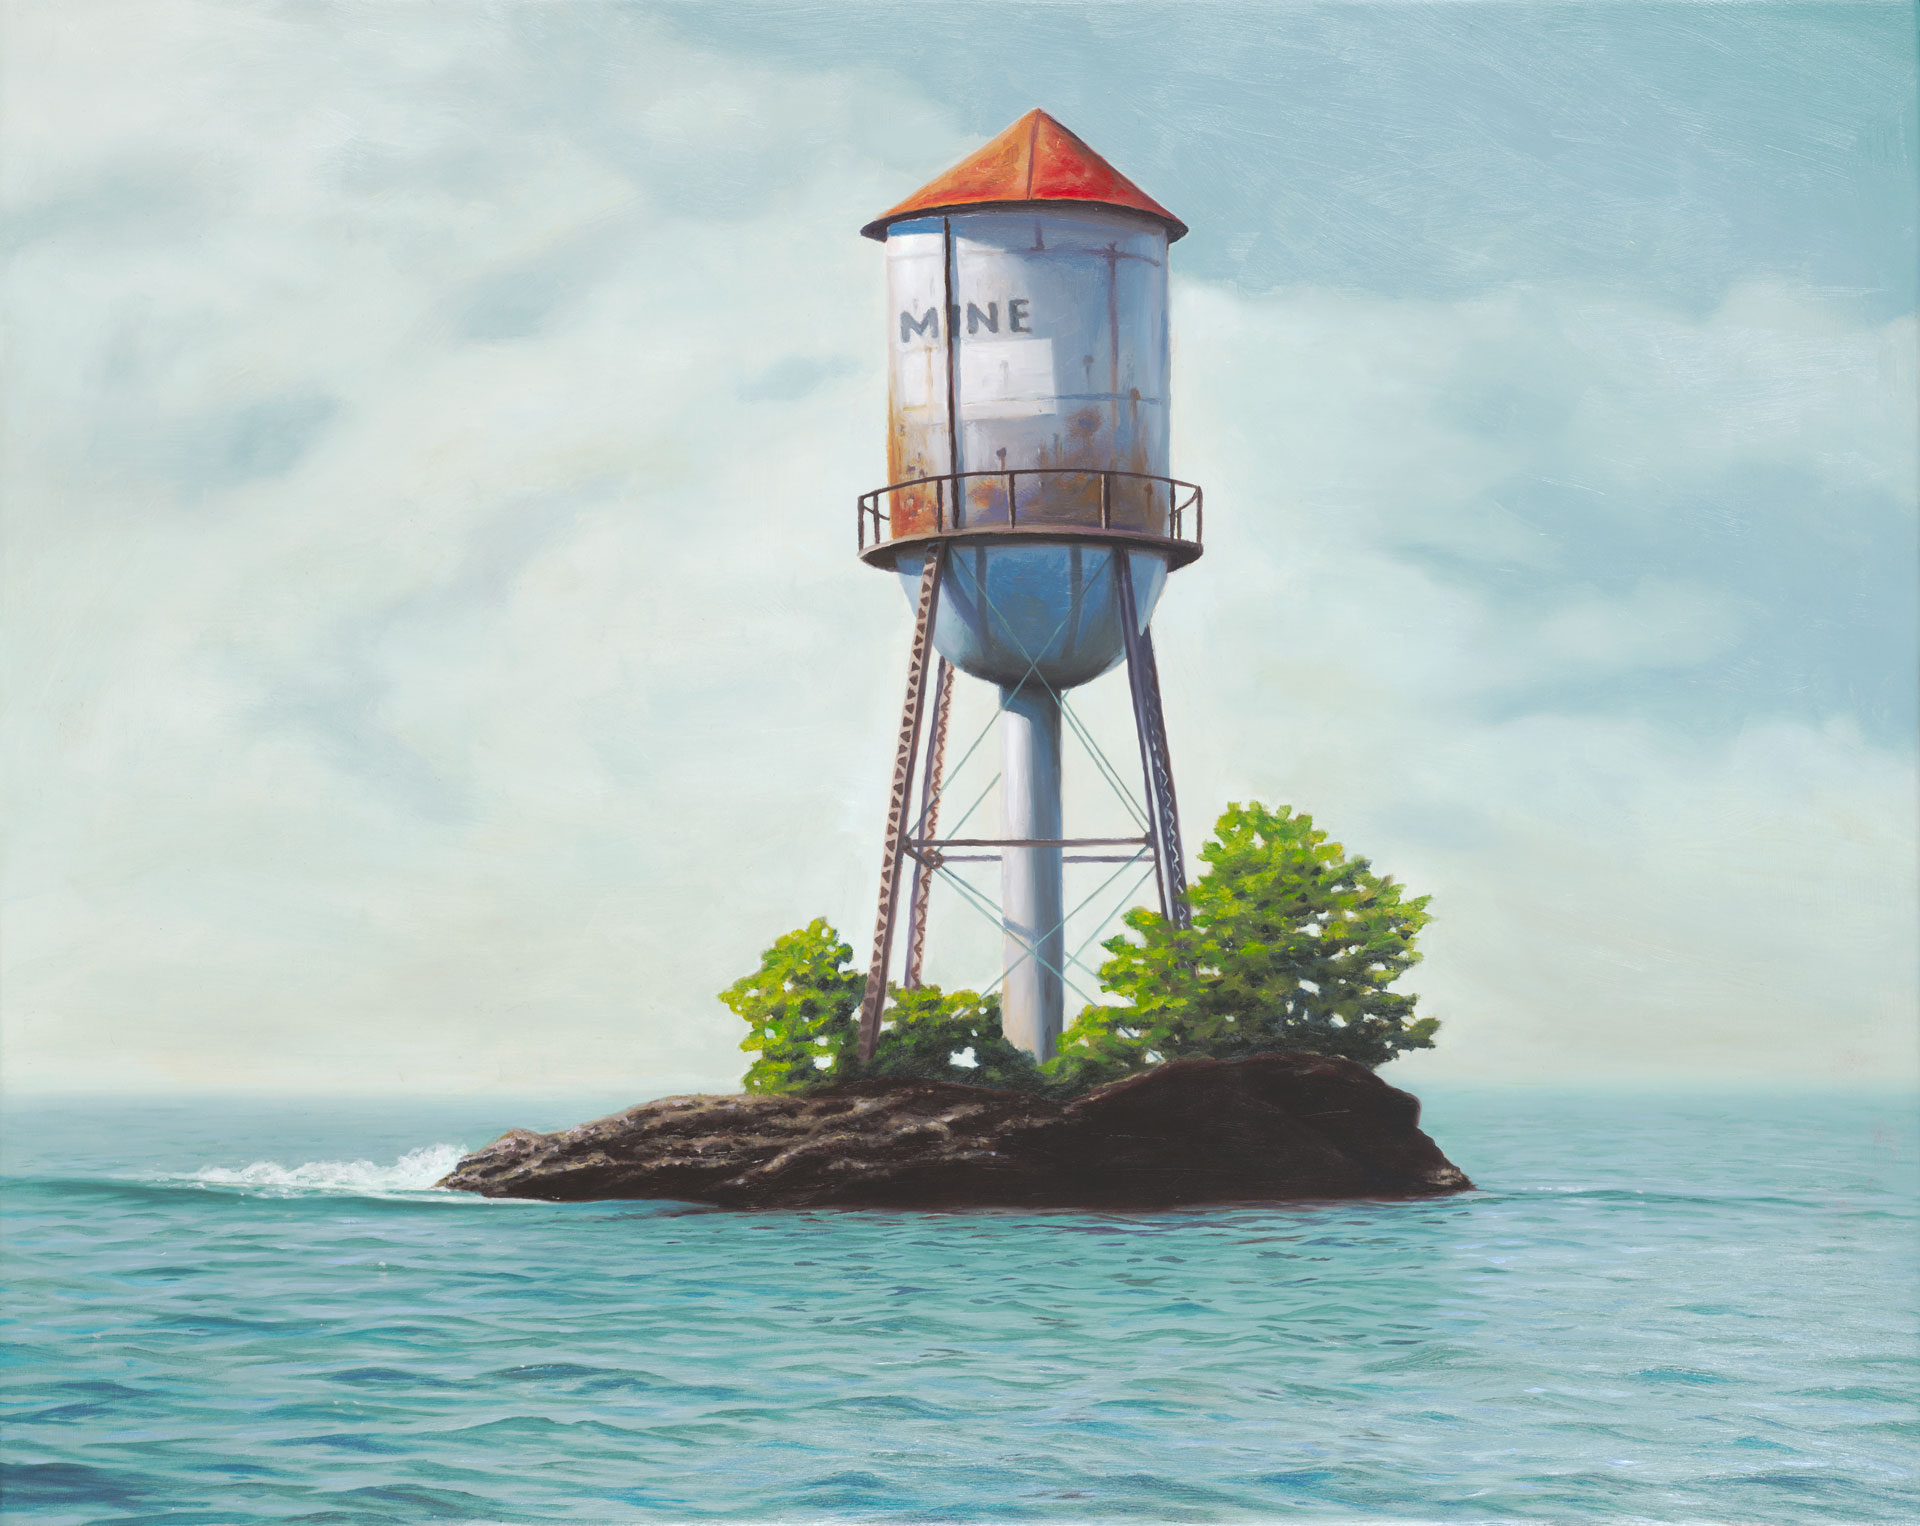 An Unquenchable Thirst, painting of rusty water tower isolated on an island in the ocean, painting about unquenchable thirst, painting about water the sea, art about greed gluttony and hoarding, soulful uplifting inspirational art, soul stirring illusion art, romantic art,  surrealism, surreal art, dreamlike imagery, fanciful art, fantasy art, dreamscape visual, metaphysical art, spiritual painting, metaphysical painting, spiritual art, whimsical art, whimsy art, dream art, fantastic realism art, magic realism oil painting by Paul Bond